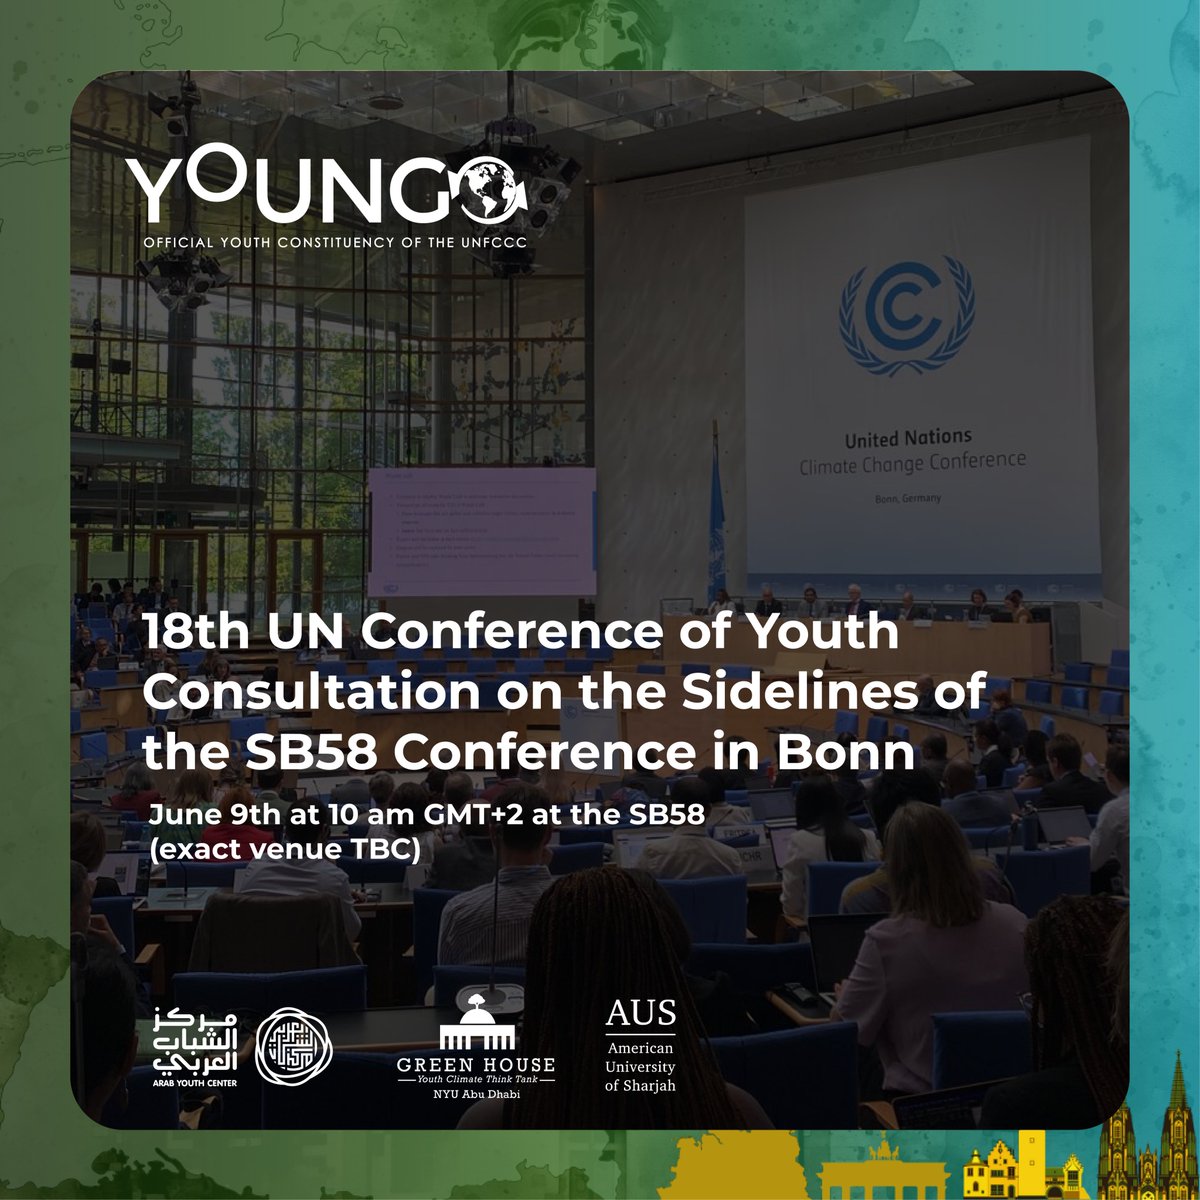 Together with our Cohosts, the @AUSharjah , @ArabYouthCenter , and @NYUAbuDhabi ’s Green House we will have a #COY18 Youth Consultation on the Sidelines of the #SB58 on 9th June to gather youth input and incorporate suggestions for the upcoming 18th #UN Conference of Youth.